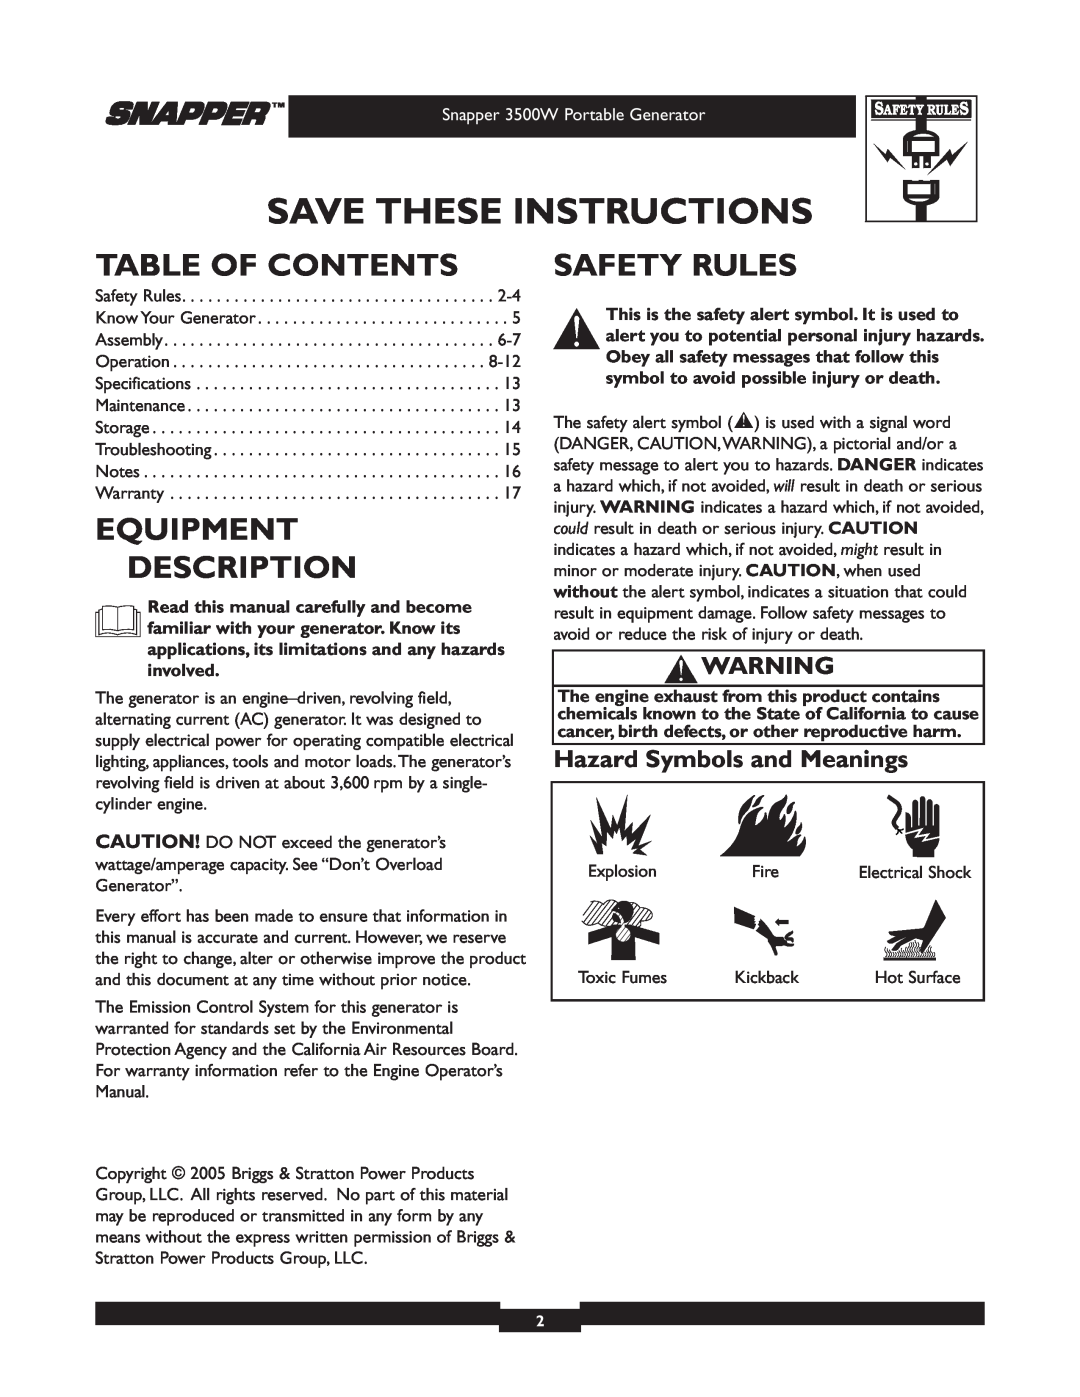 Snapper 030214 manual Table Of Contents, Equipment Description, Safety Rules, Hazard Symbols and Meanings 